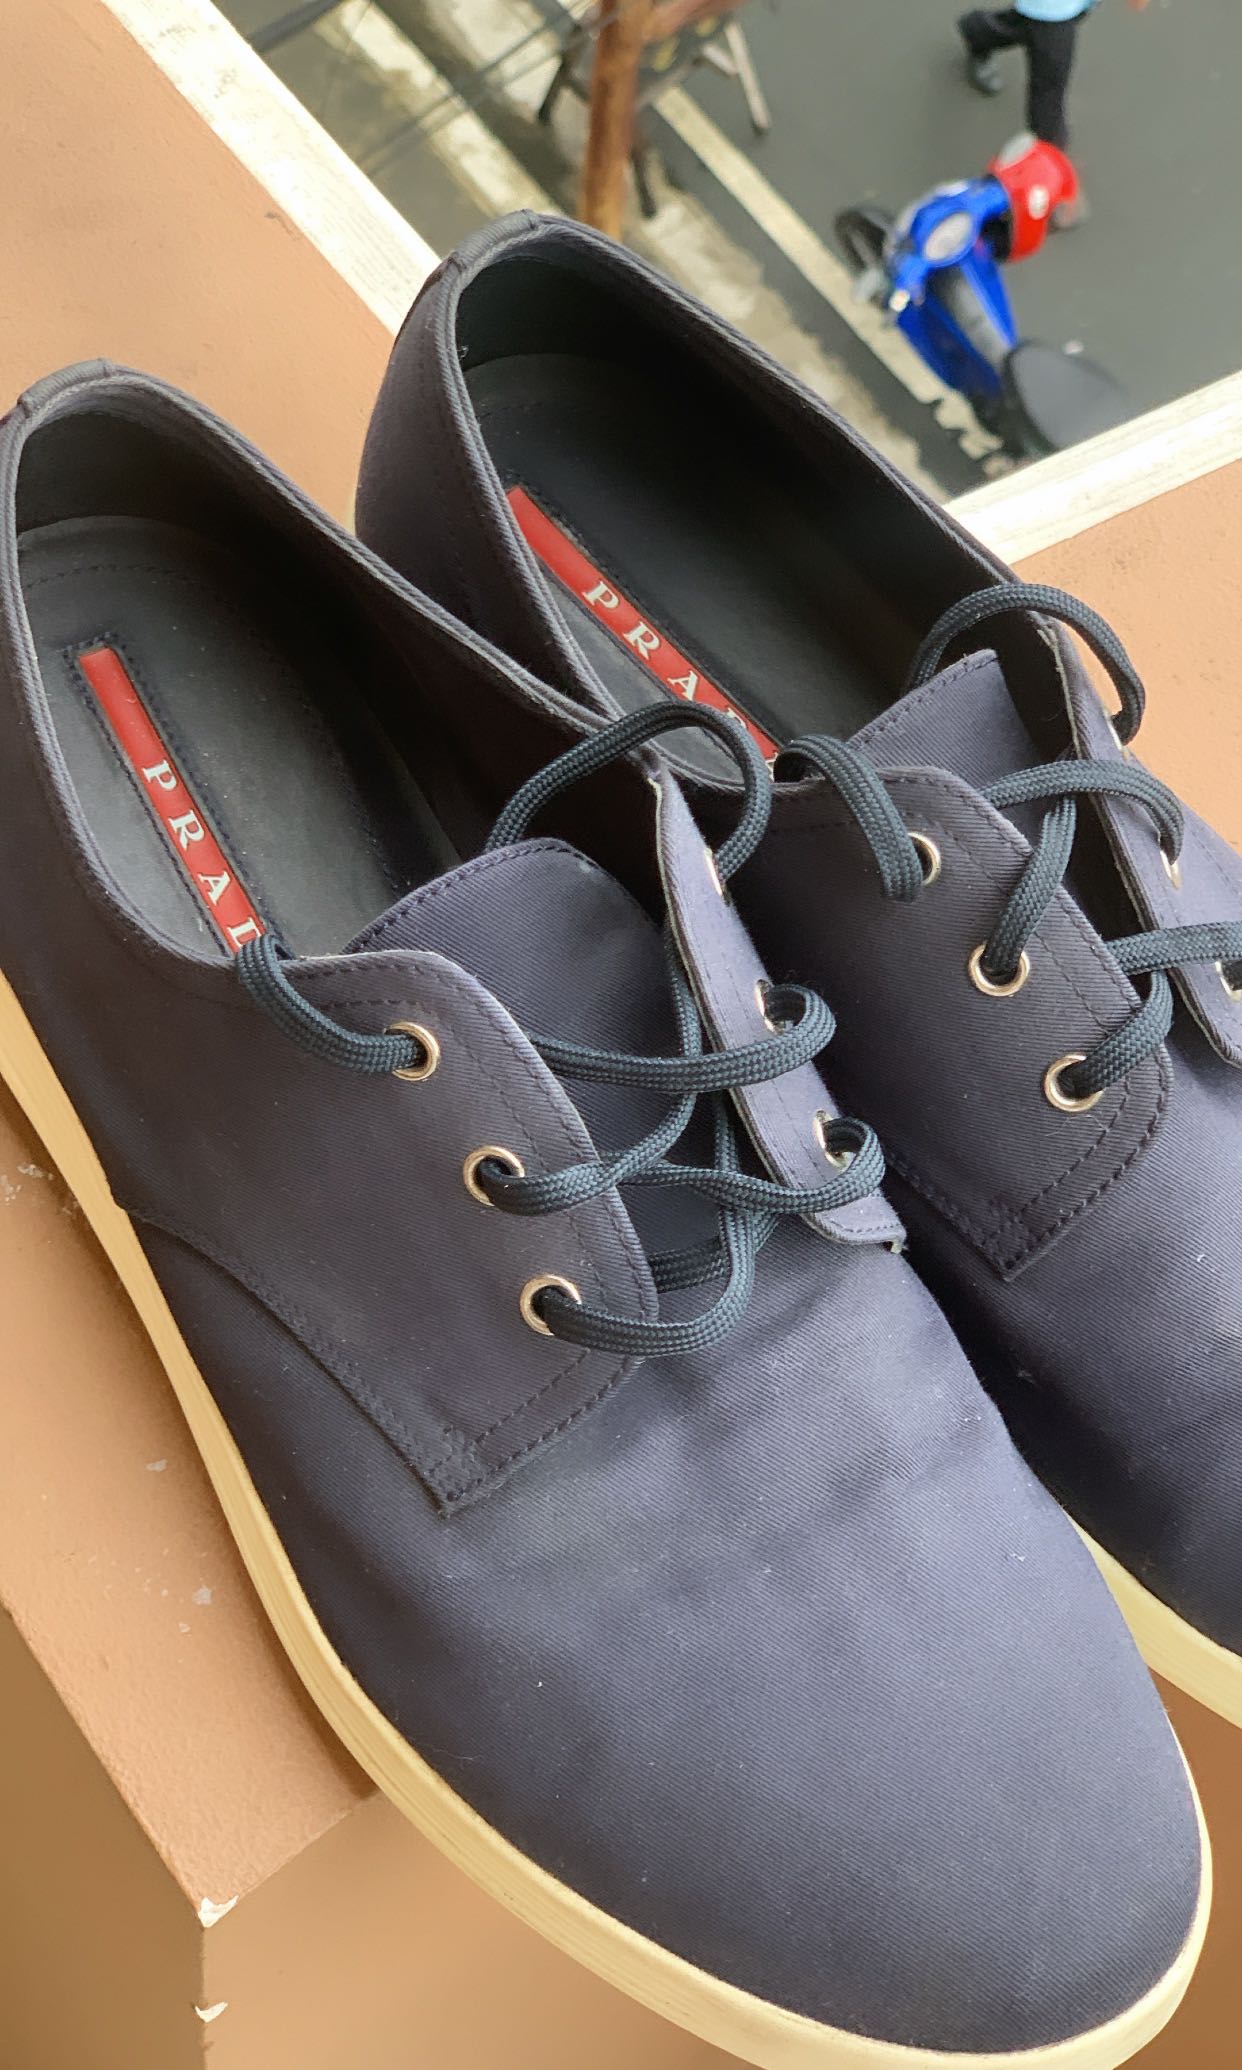 PRADA SHOES SIZE 12 MENS, Men's Fashion, Footwear, Sneakers on Carousell